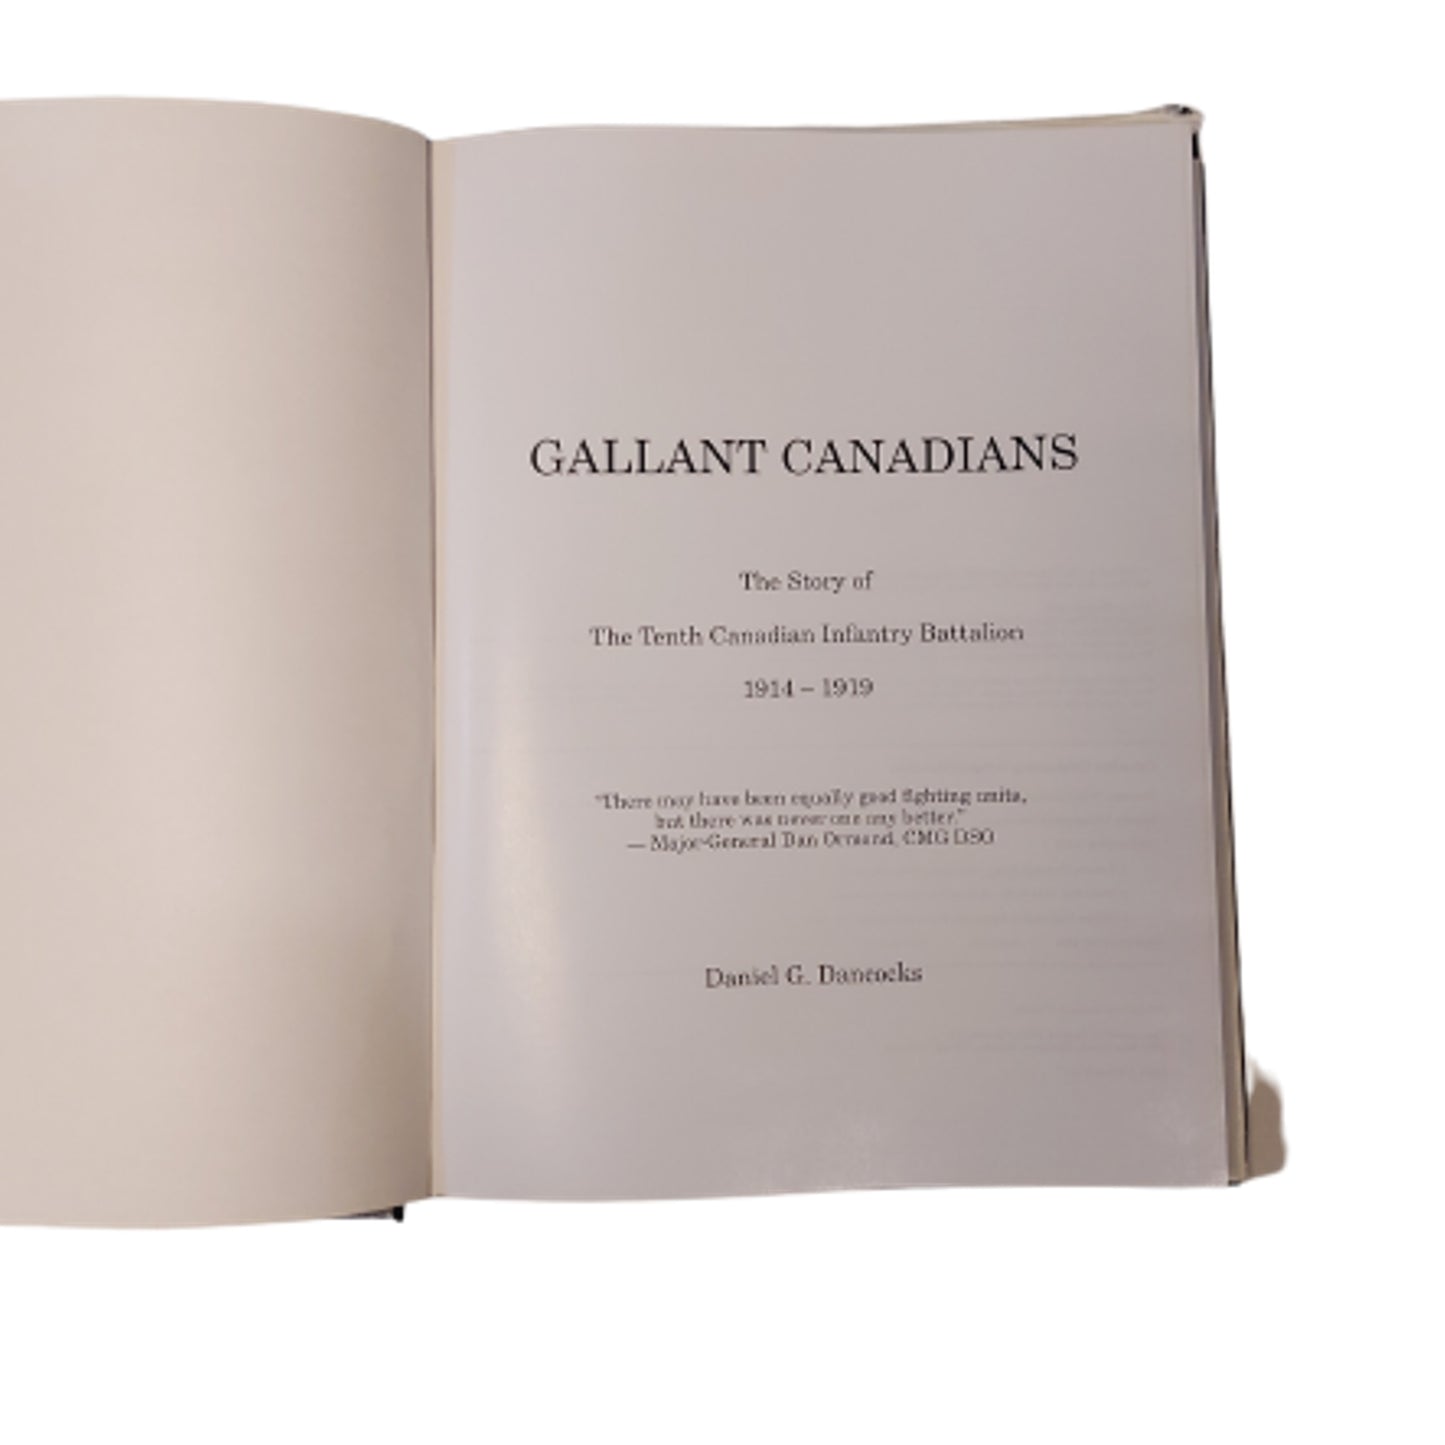 Gallant Canadians -The Story Of The Tenth Canadian Infantry Battalion 1914-1919